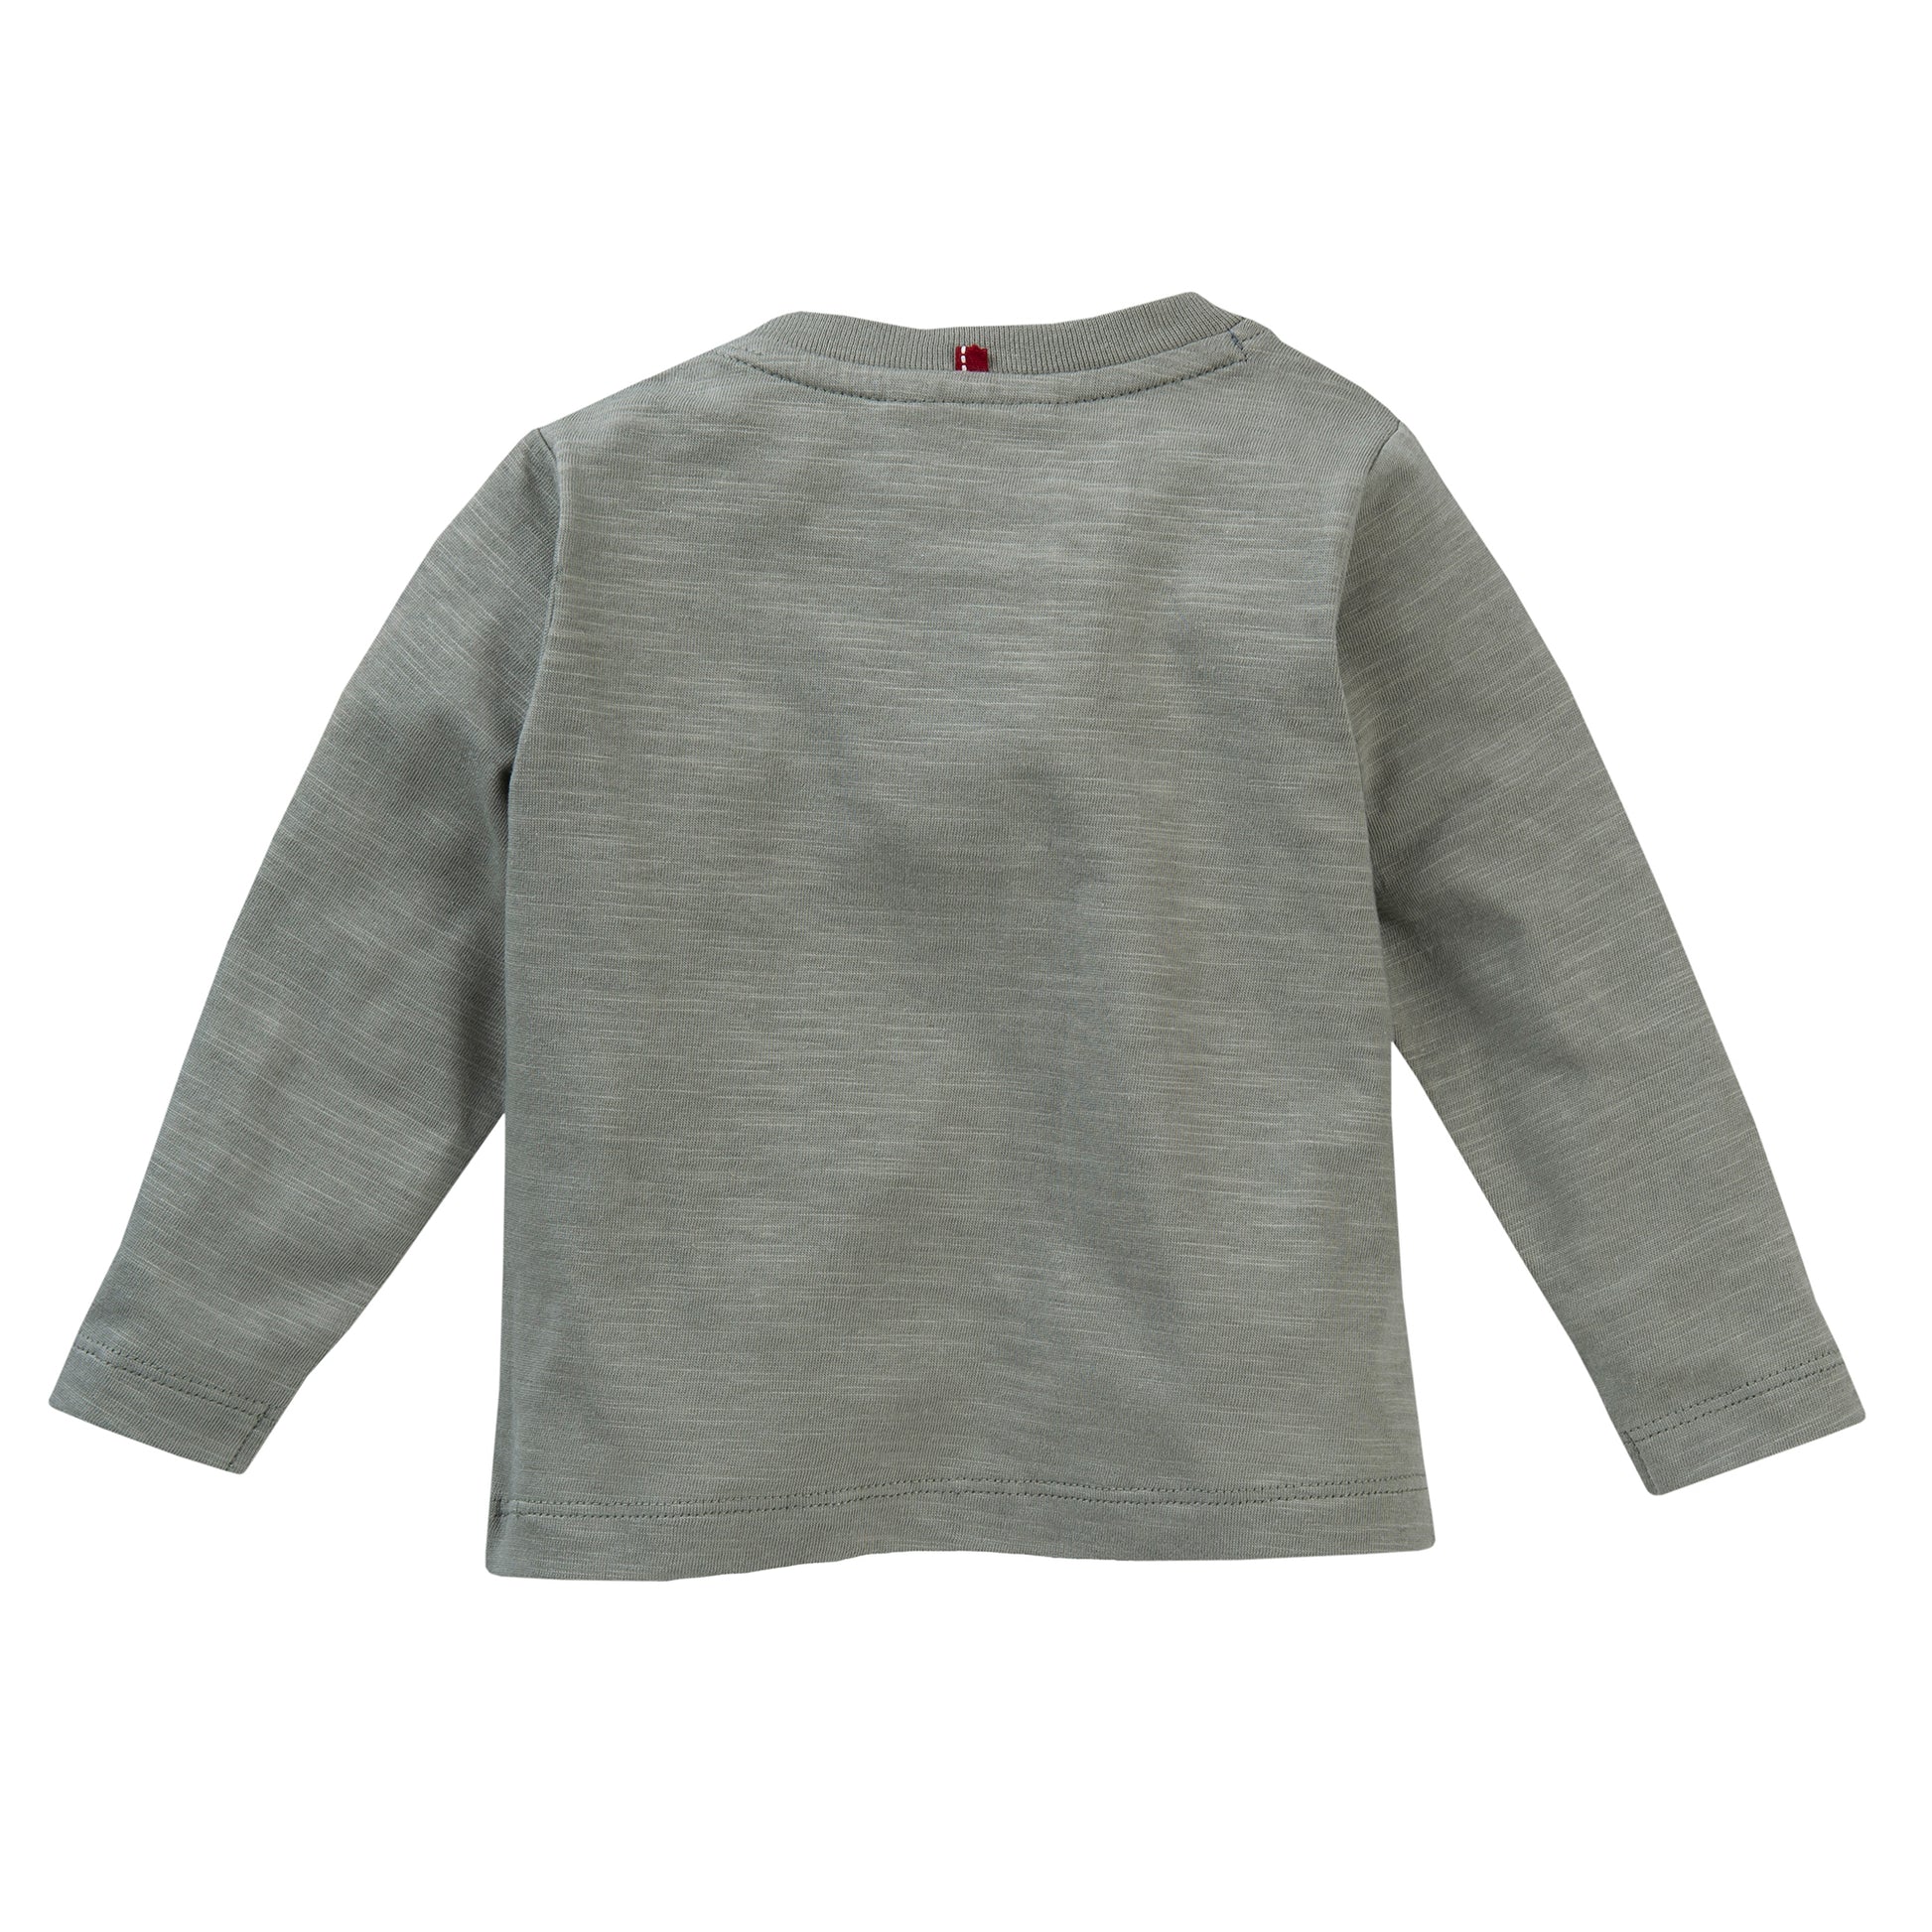 People WEAR ORGANIC Octopus Applique - Sage | Long Sleeve Baby Top | GOTS Organic Cotton | Back | BeoVERDE Ireland